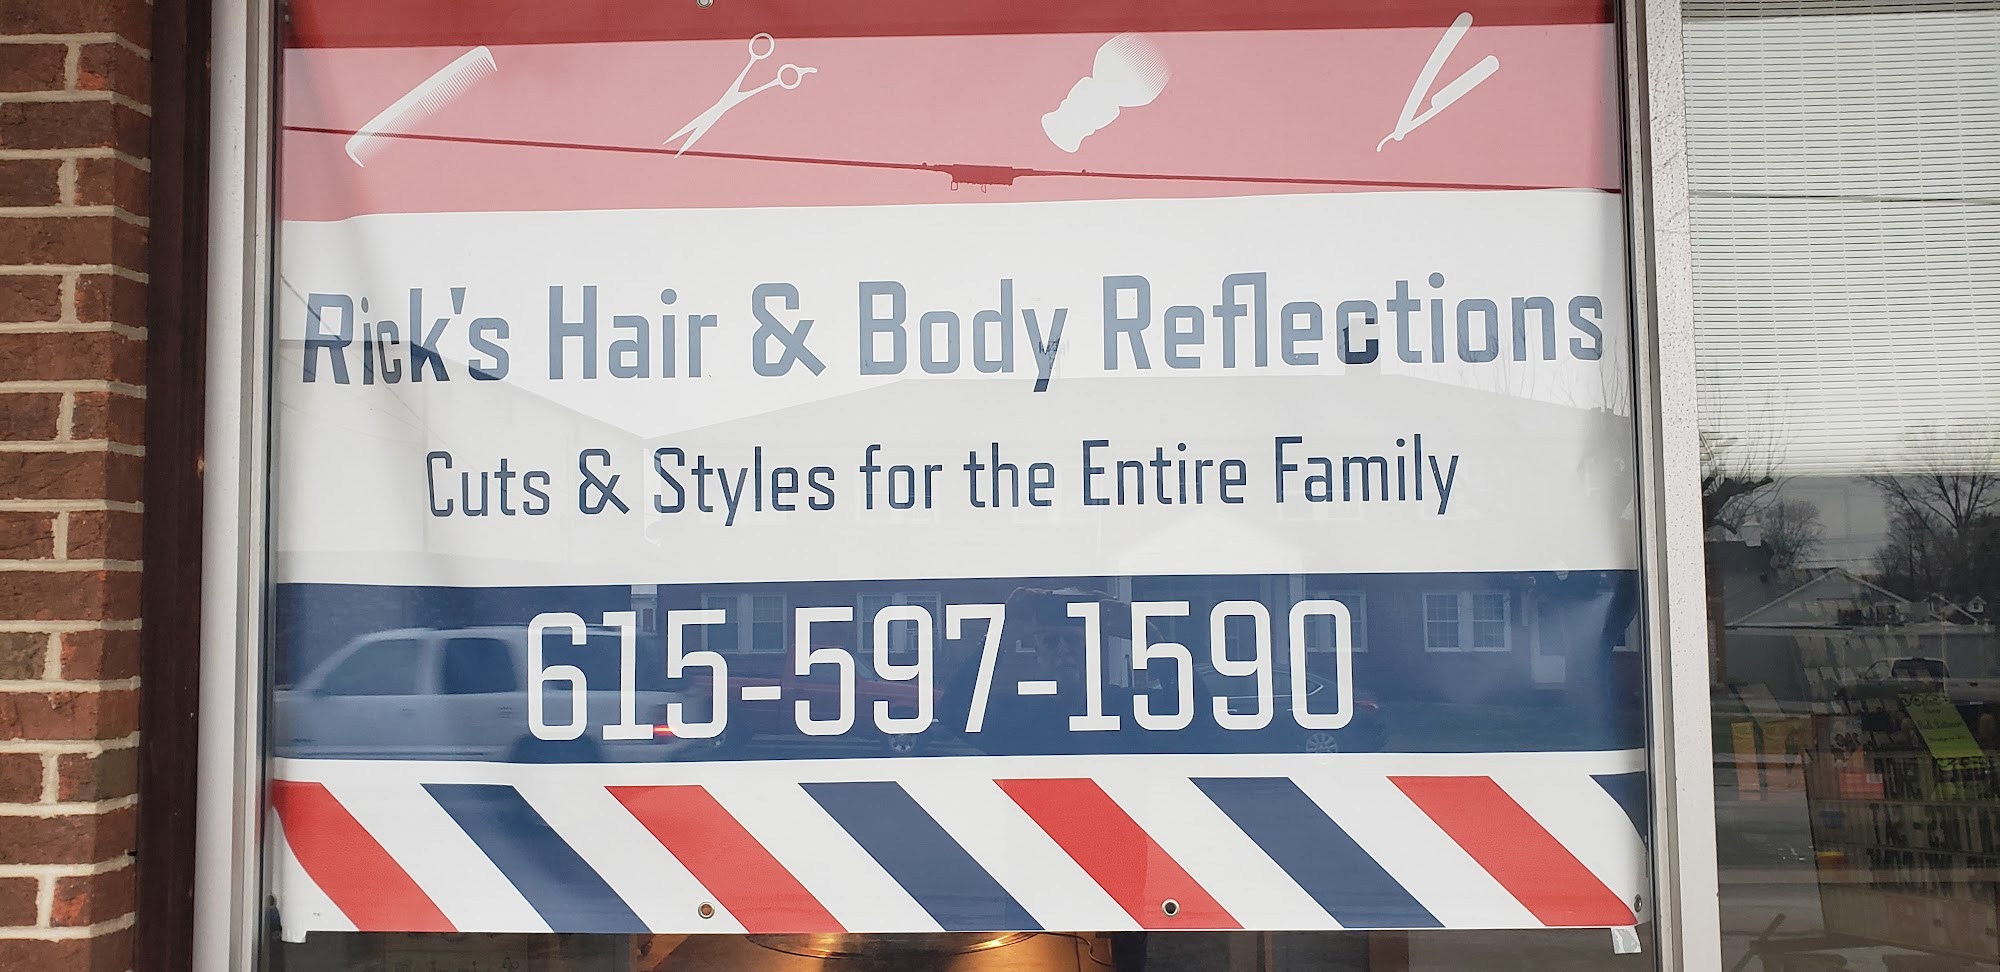 Rick's Hair & Body Reflections 208 W Main St, Smithville Tennessee 37166